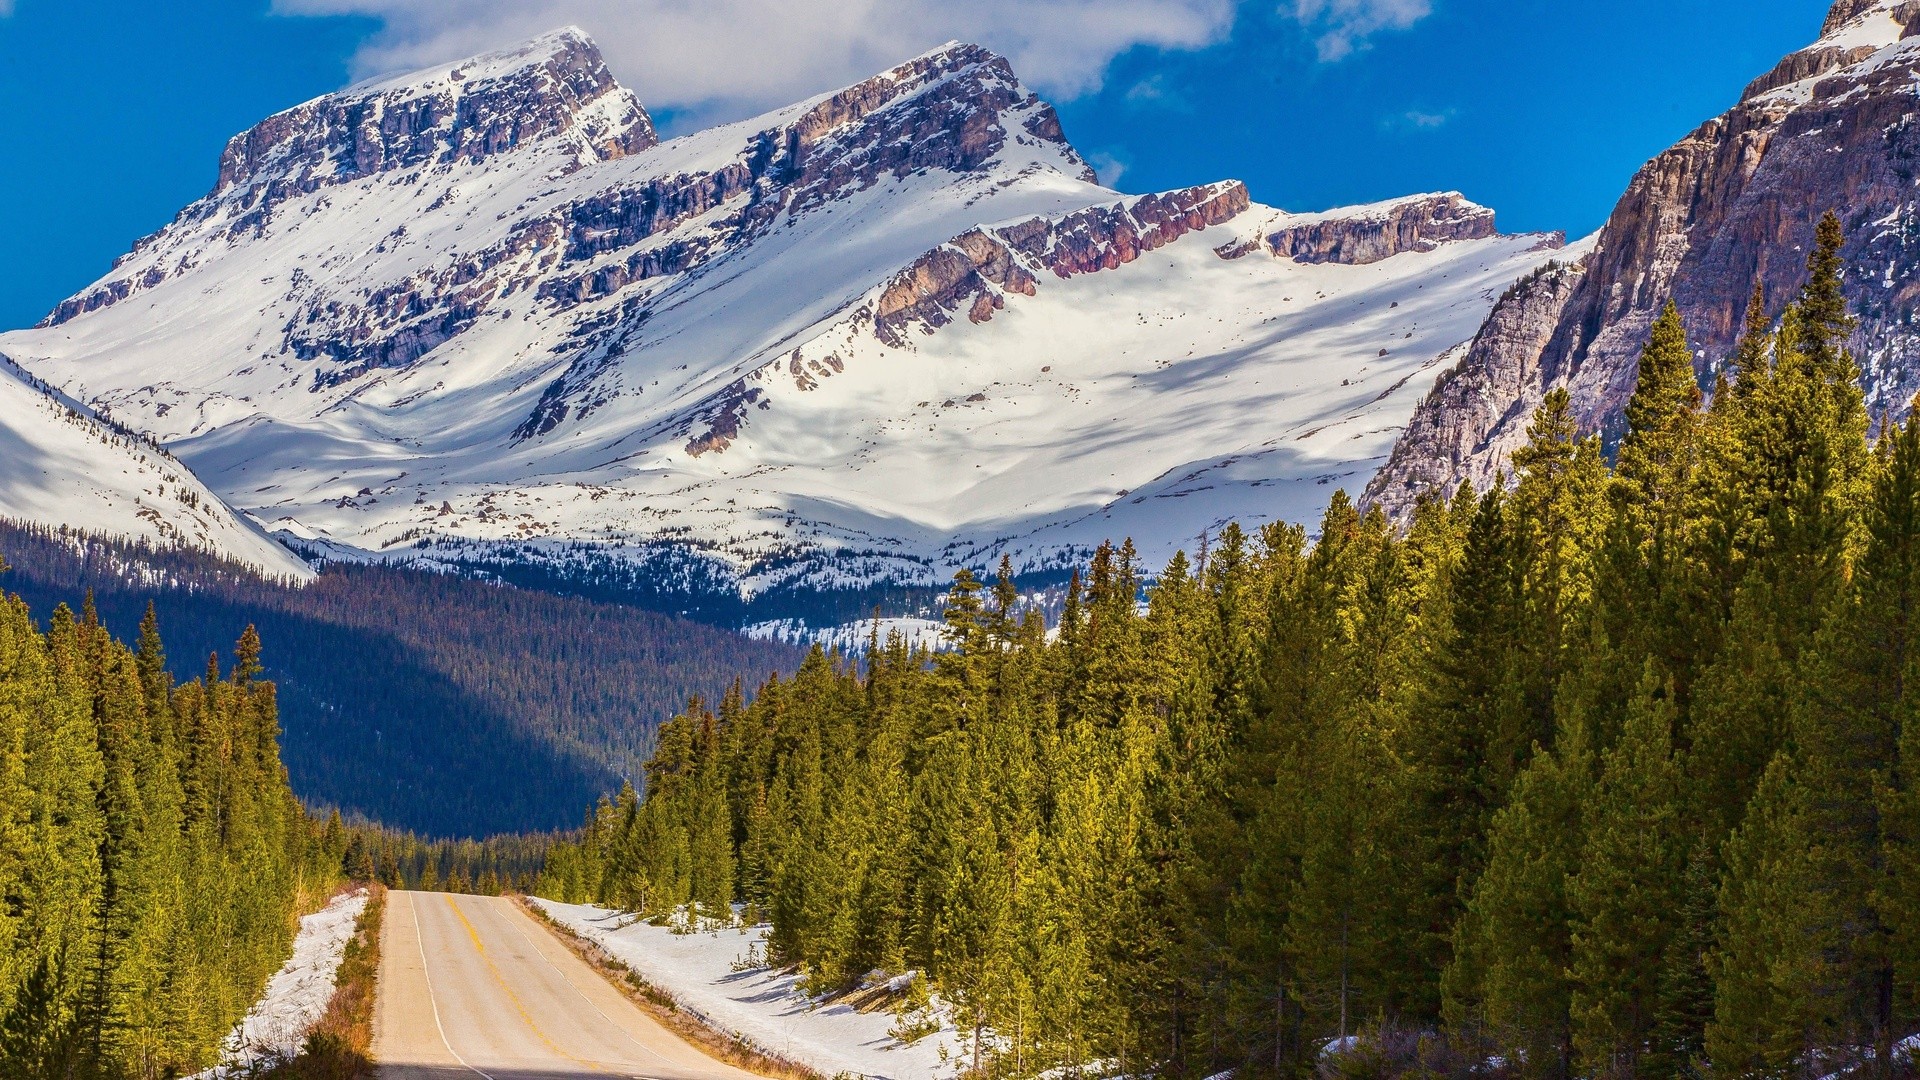 General 1920x1080 landscape Canada mountains road trees Banff National Park nature snowy peak